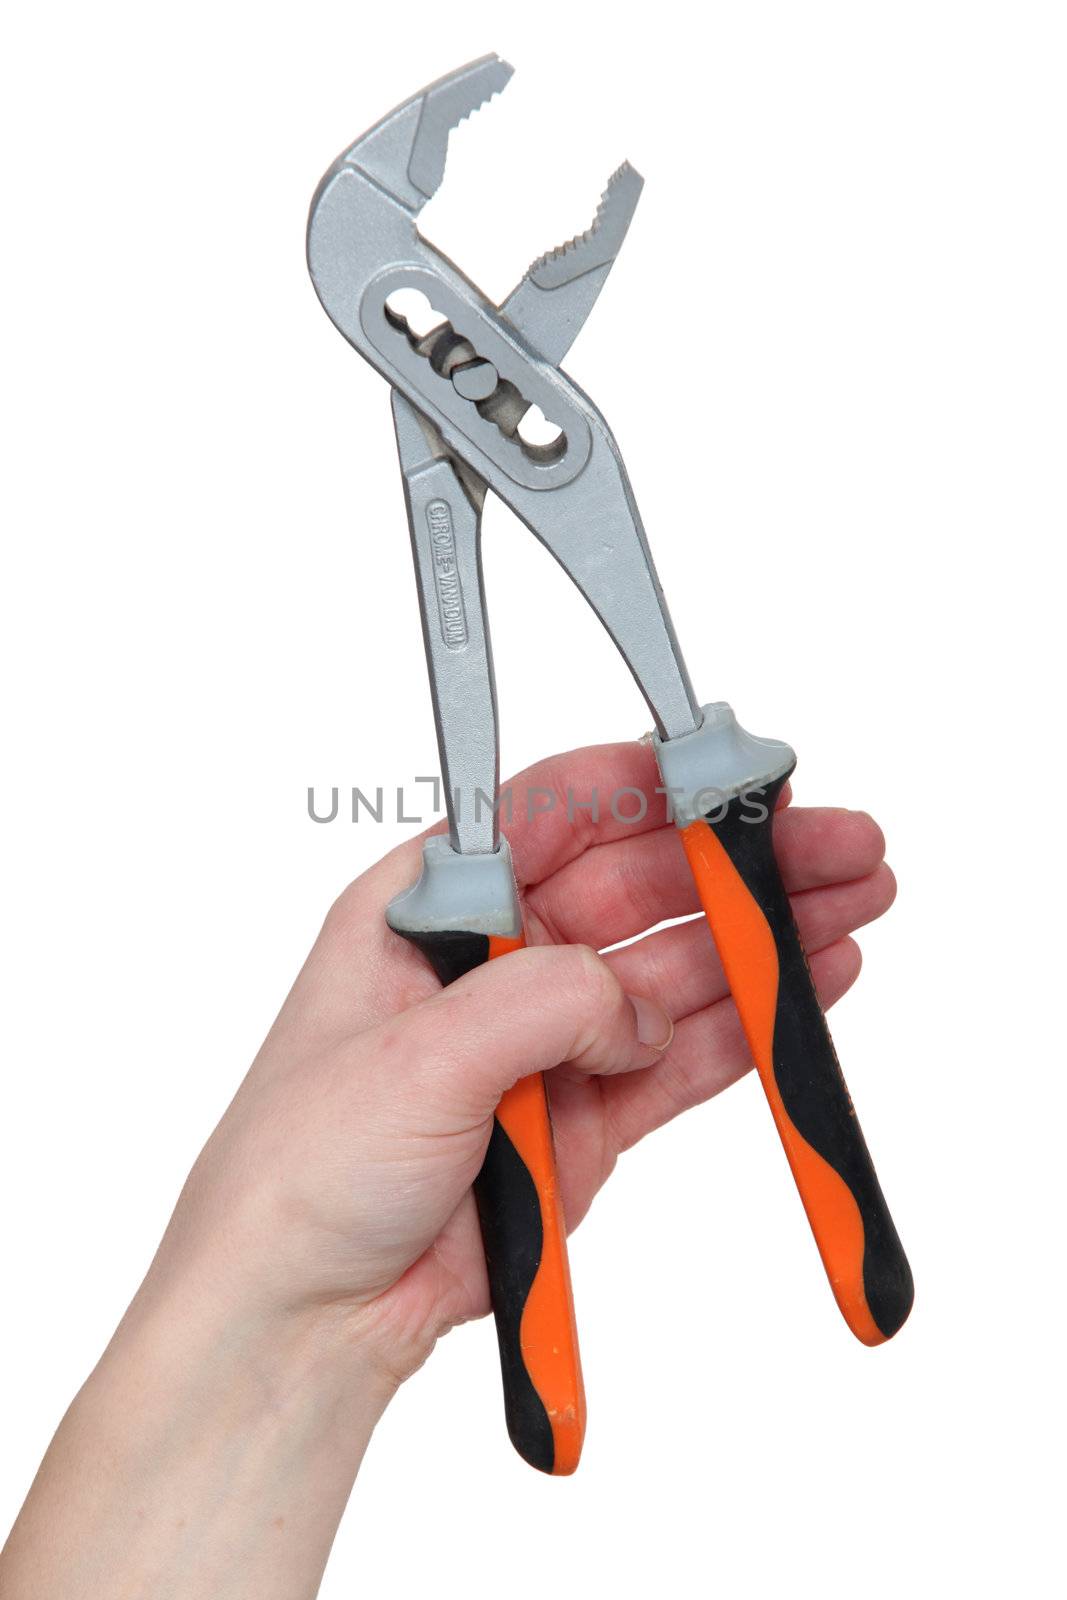 Tongue and groove pliers by phovoir